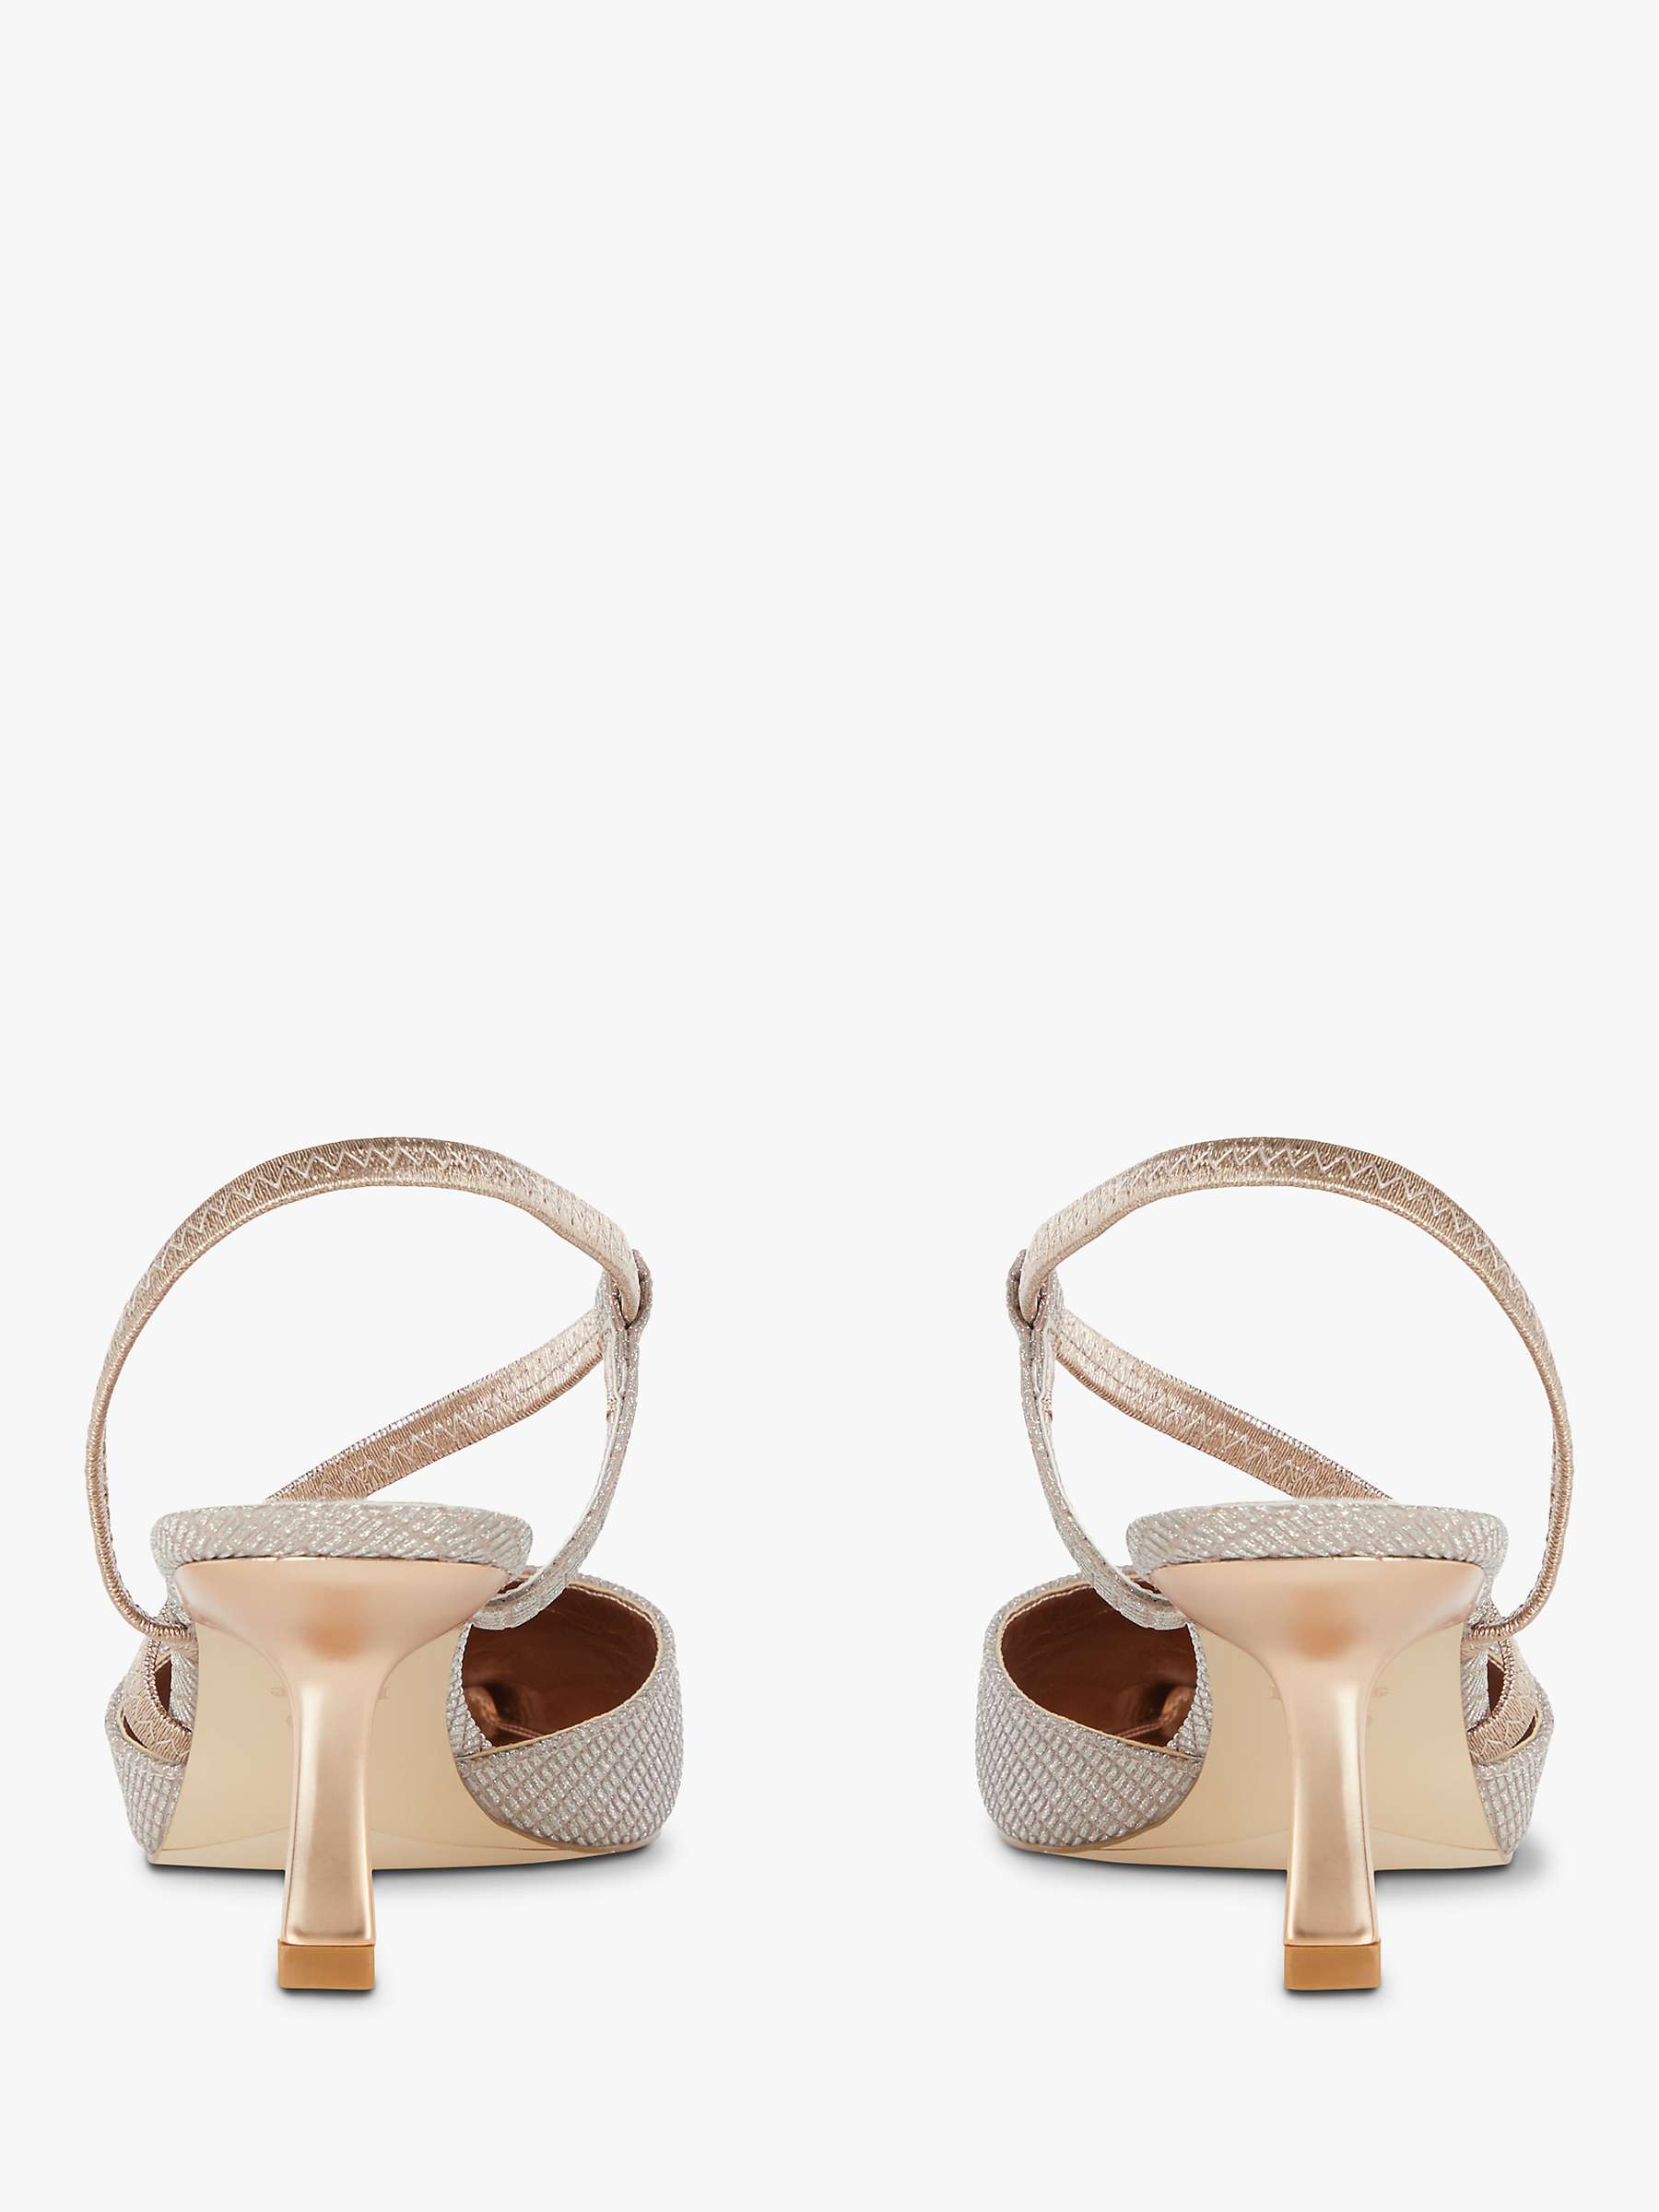 Buy Dune Columbia Fabric Court Shoes, Rose Gold Online at johnlewis.com